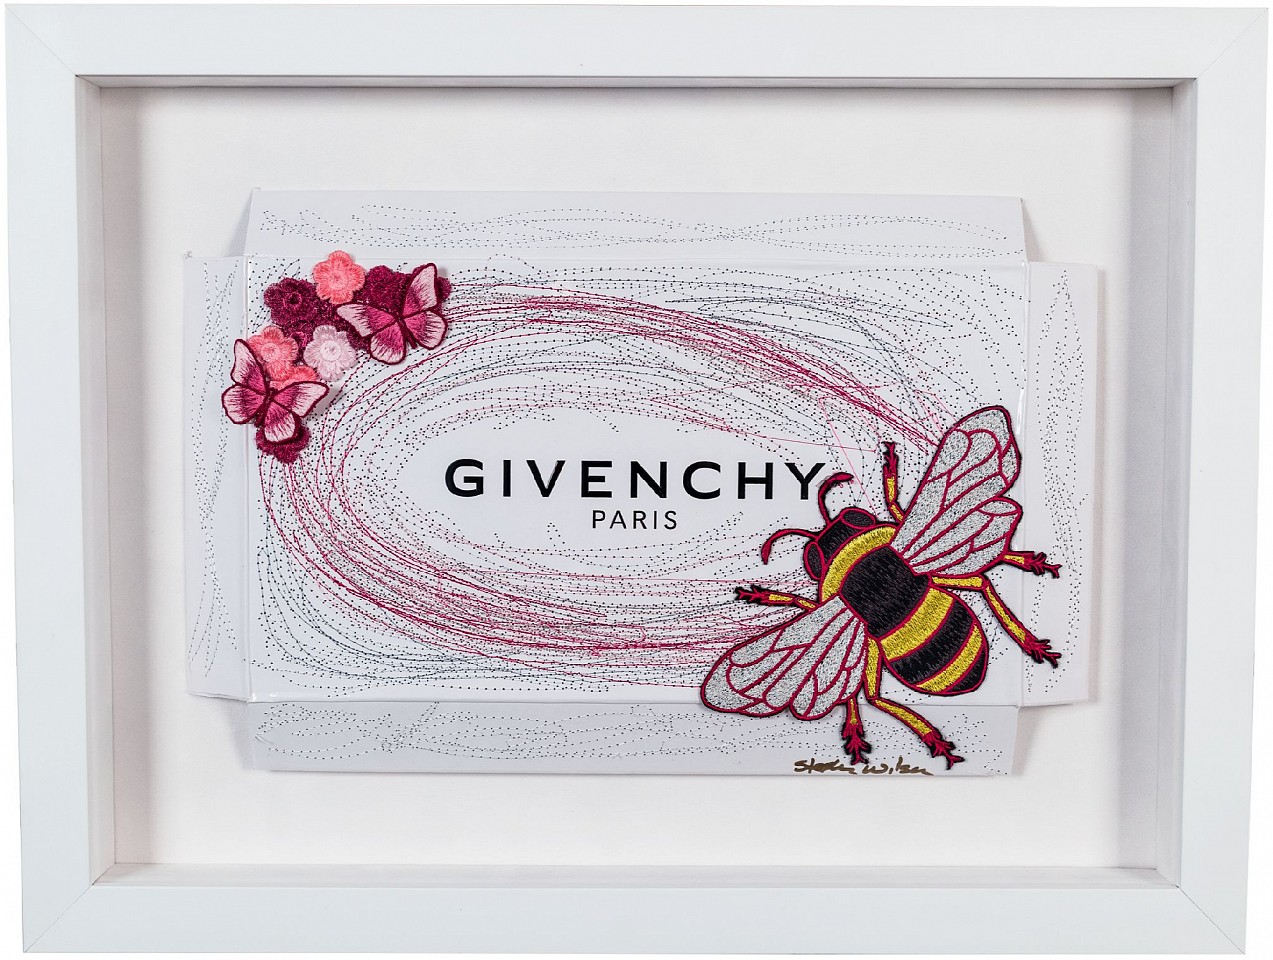 Stephen Wilson, Givenchy Bumble Bee
2017, Mixed Media